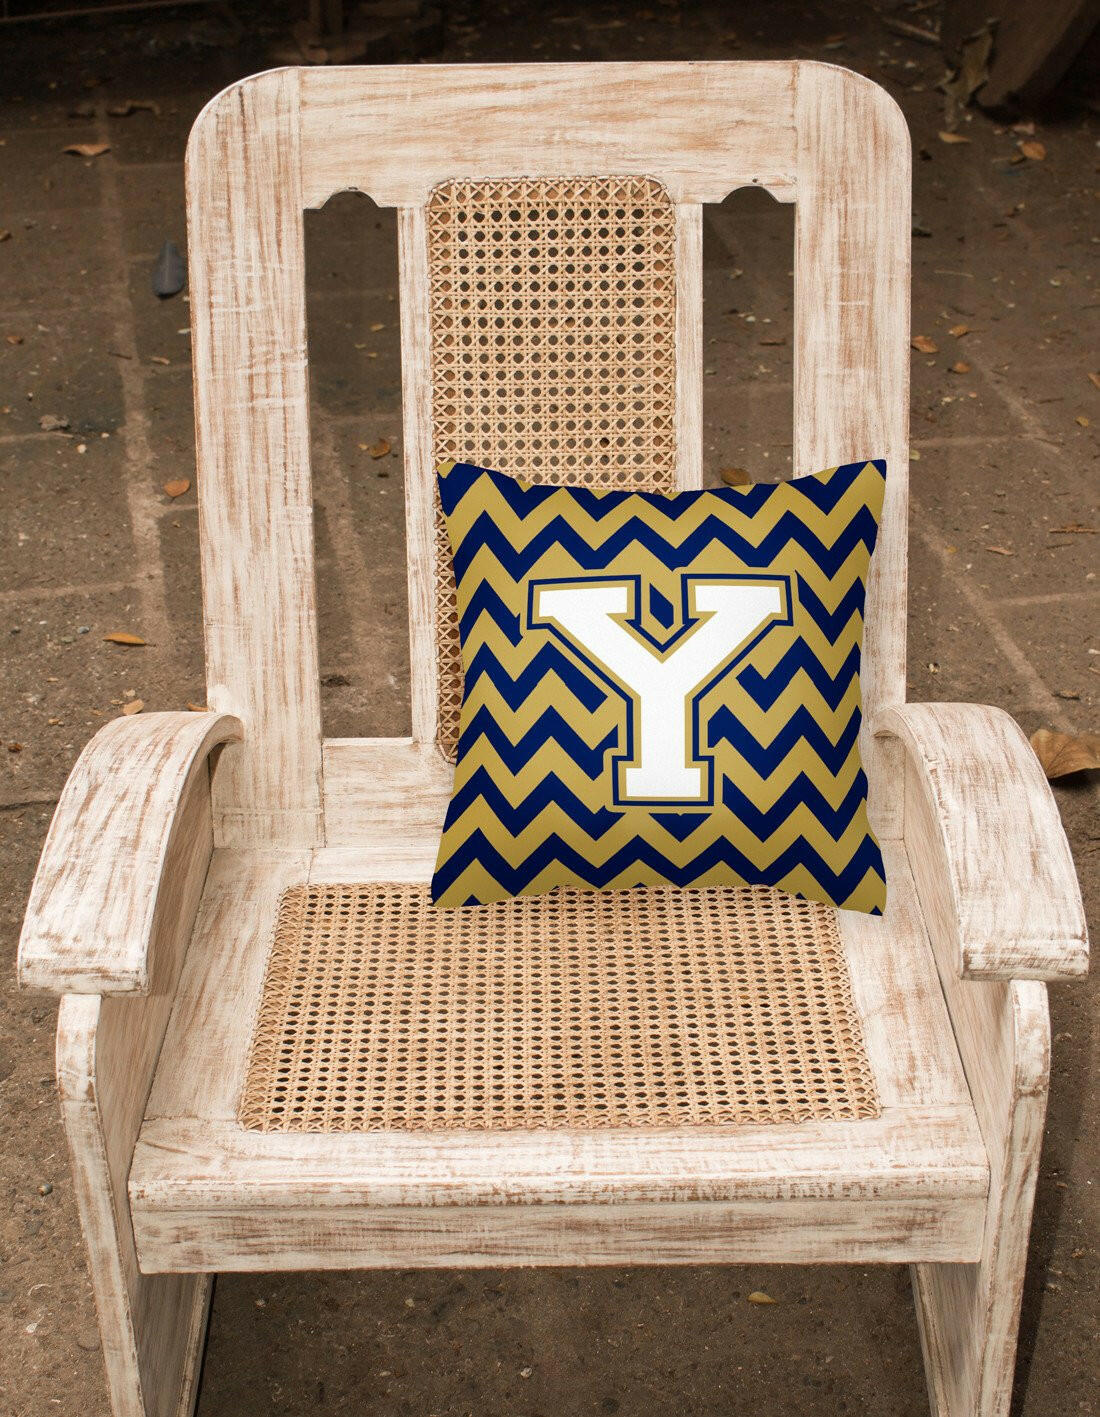 Letter Y Chevron Navy Blue and Gold Fabric Decorative Pillow CJ1057-YPW1414 by Caroline's Treasures